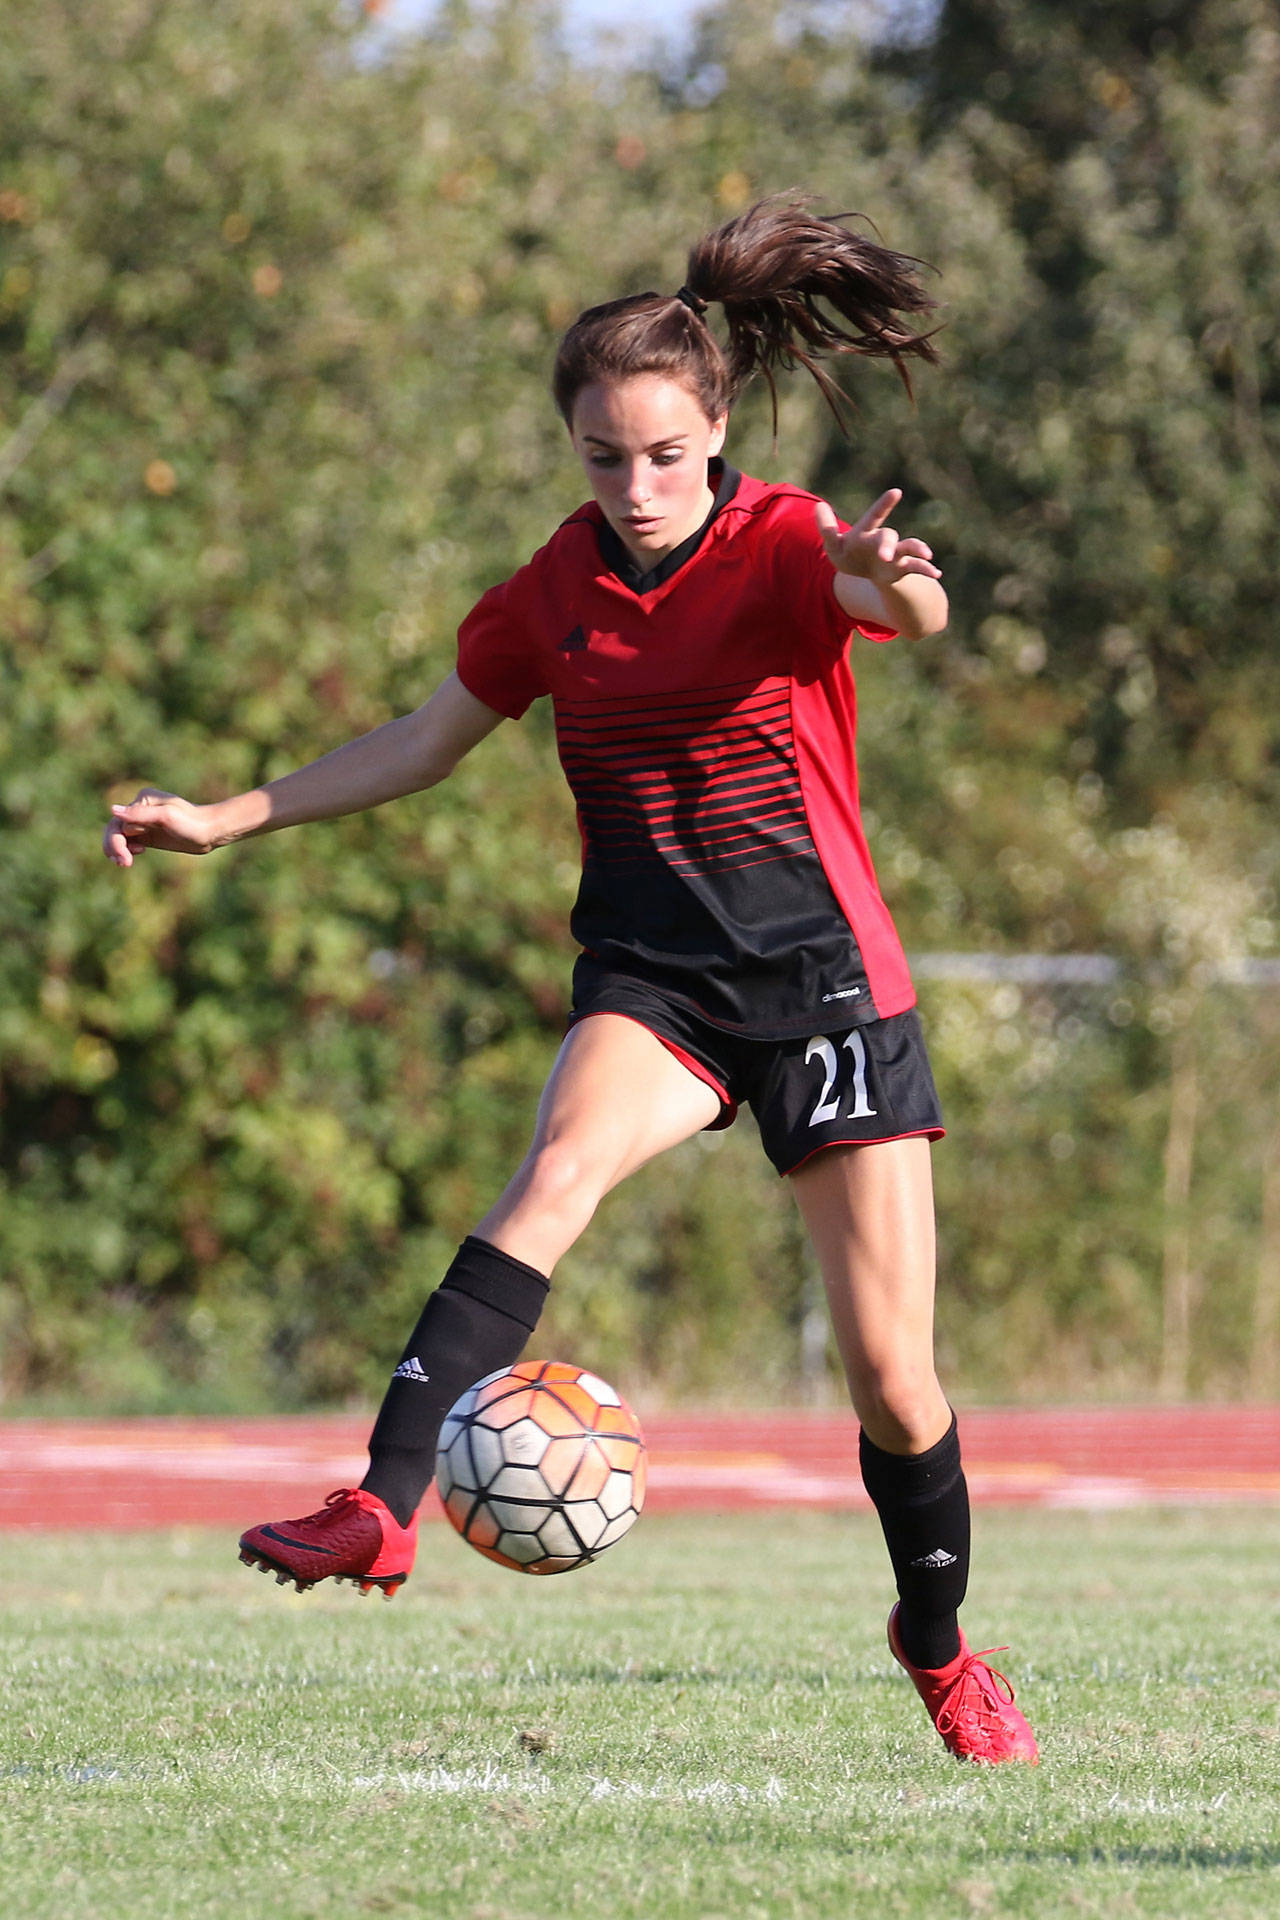 First-team, all-league selection Mallory Kortuem returns to anchor the Coupeville defense this fall. (Photo by John Fisken)